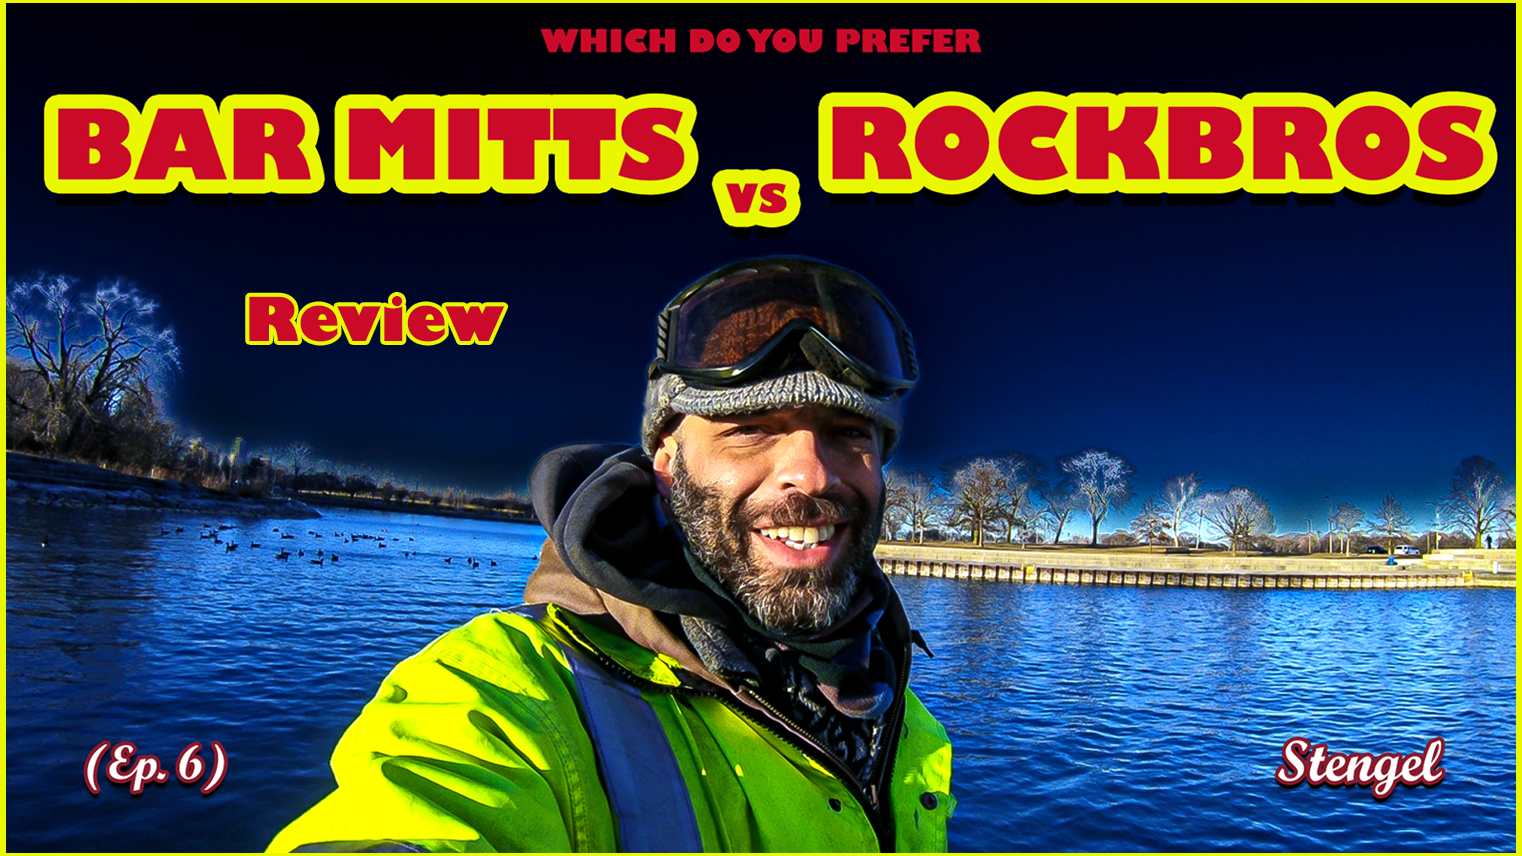 (Ep. 6) Bar Mitts Review